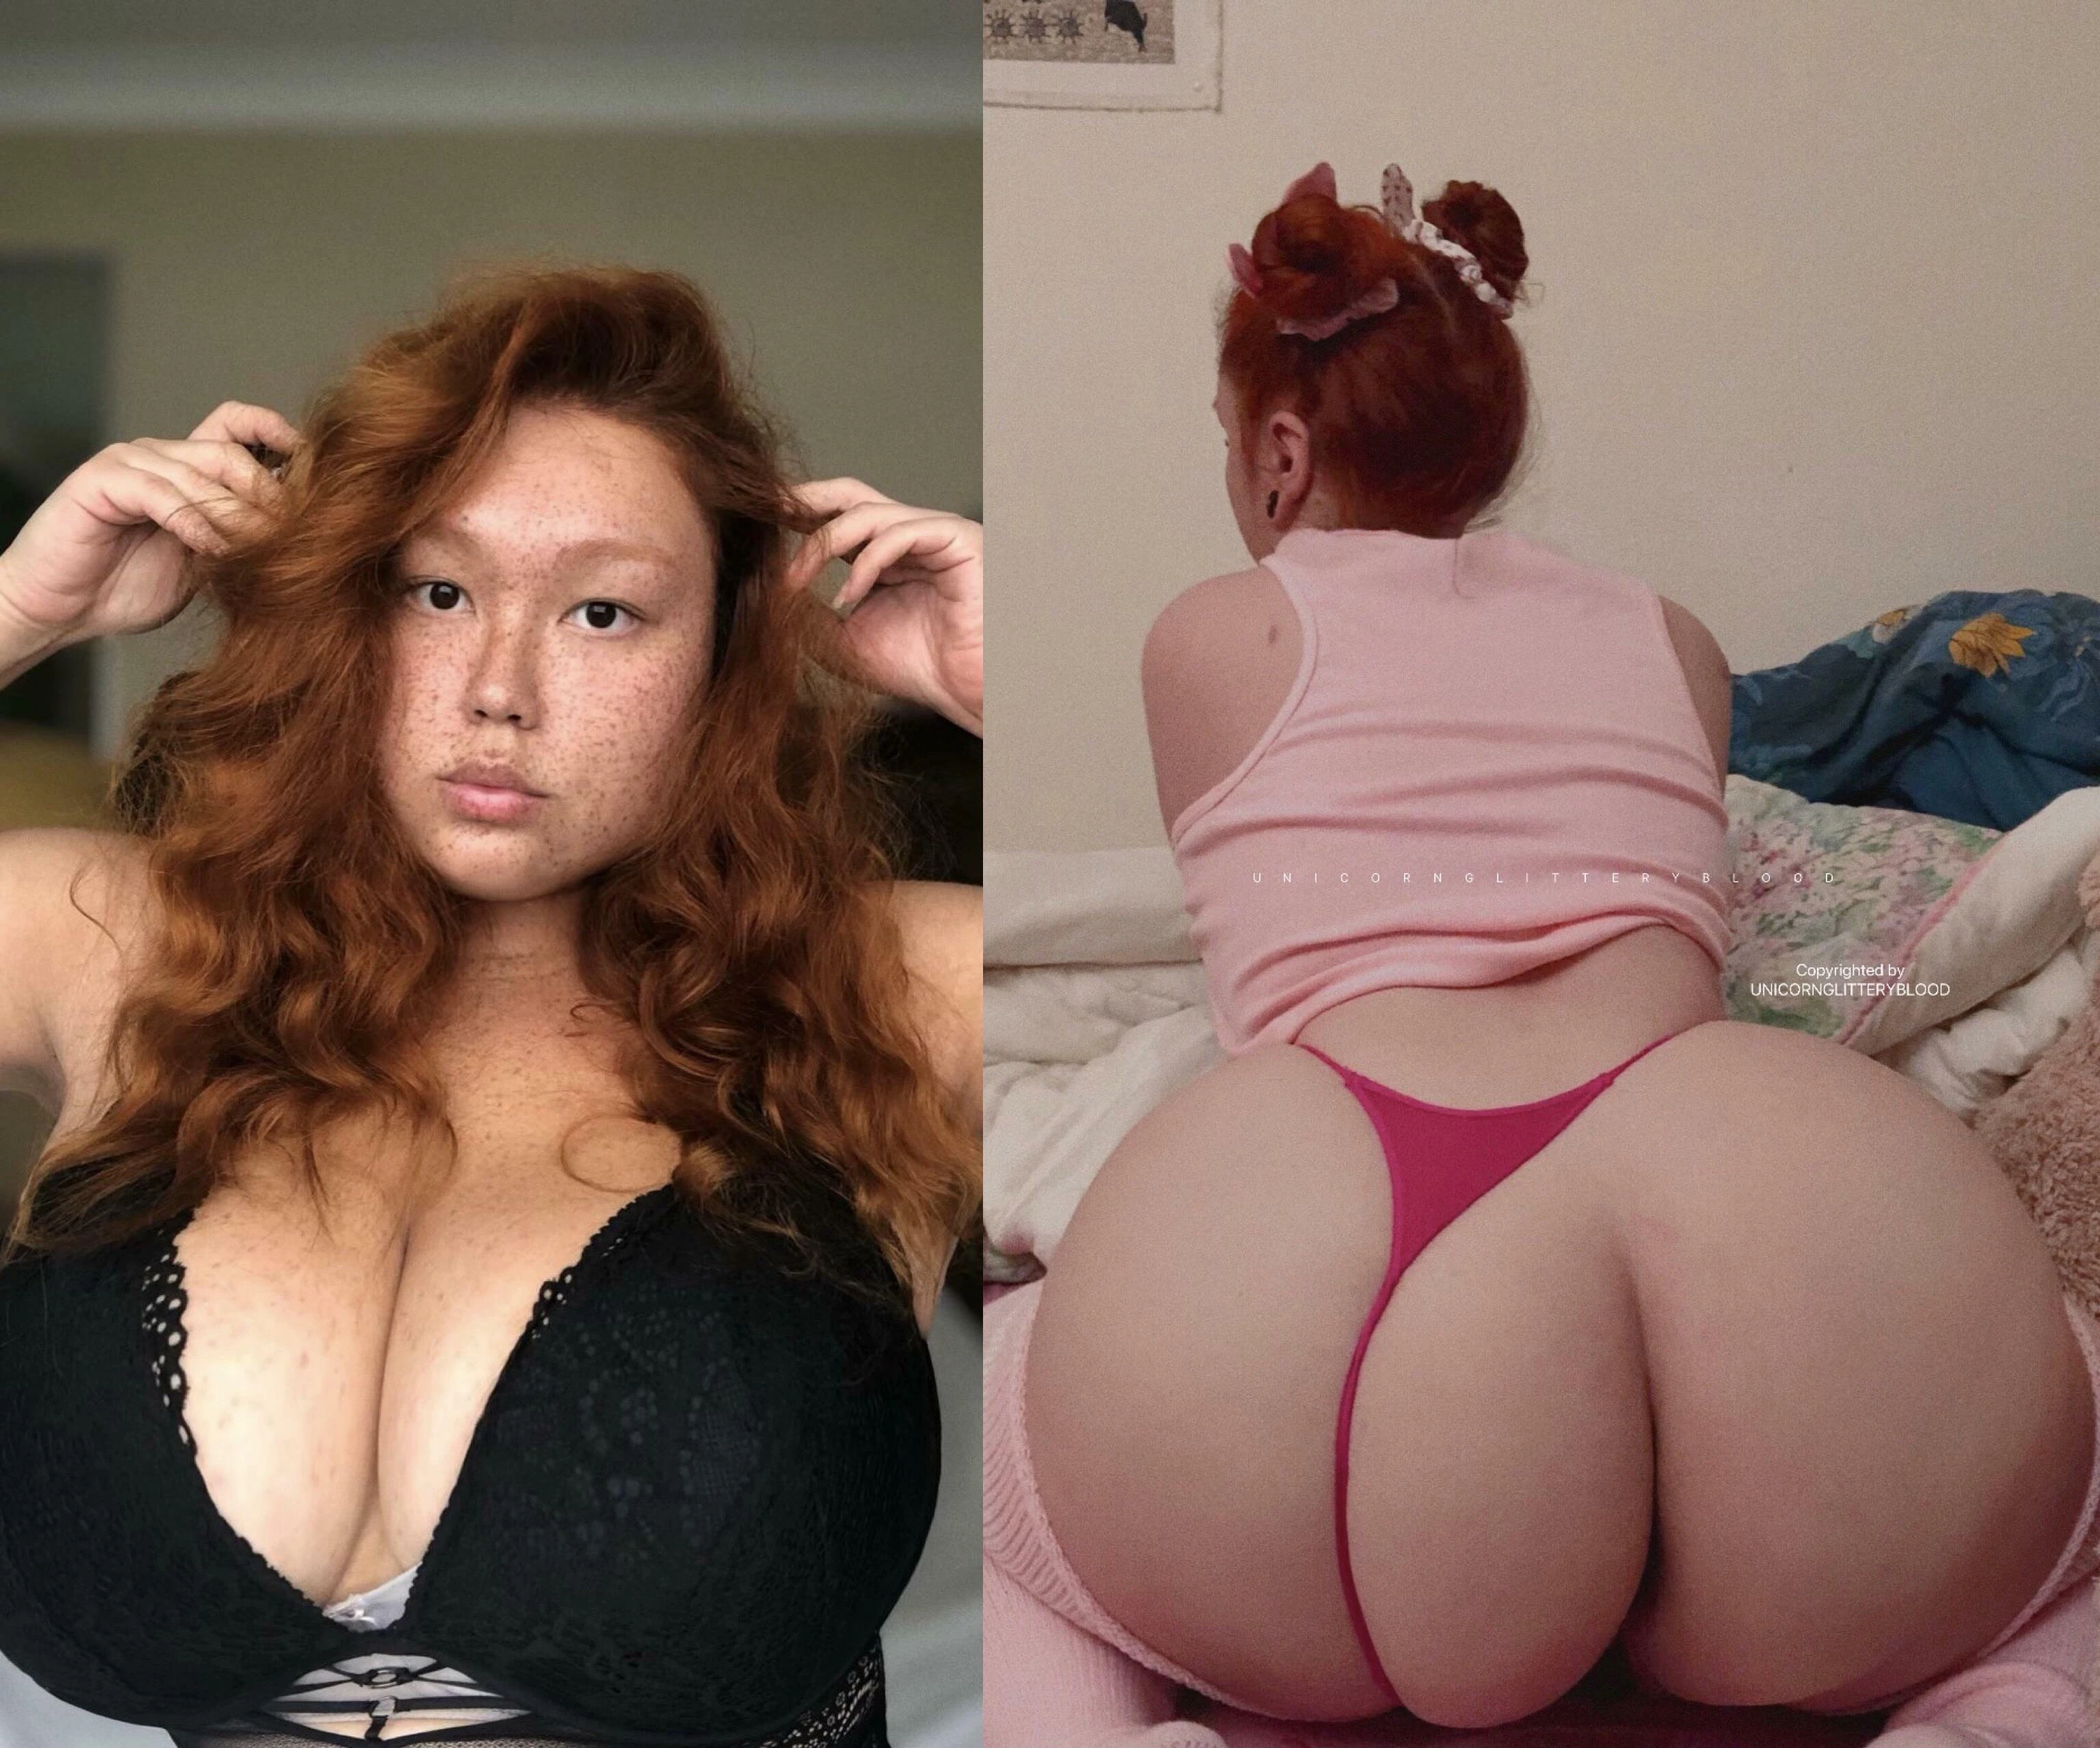 my face vs my body! Date or fuck?